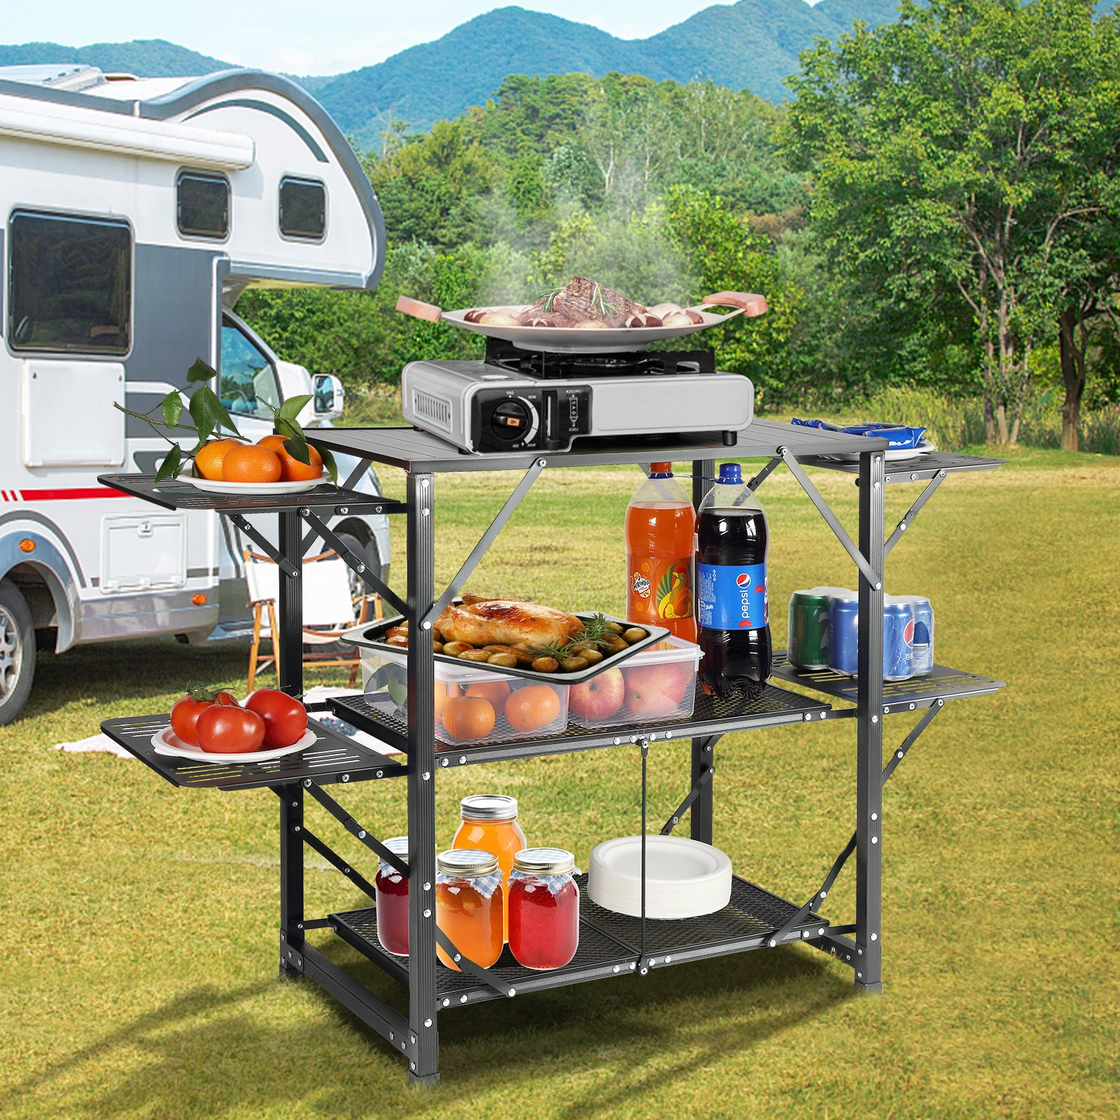 VEVOR Camping Kitchen Table - Folding Portable Cook Station with Carrying Bag